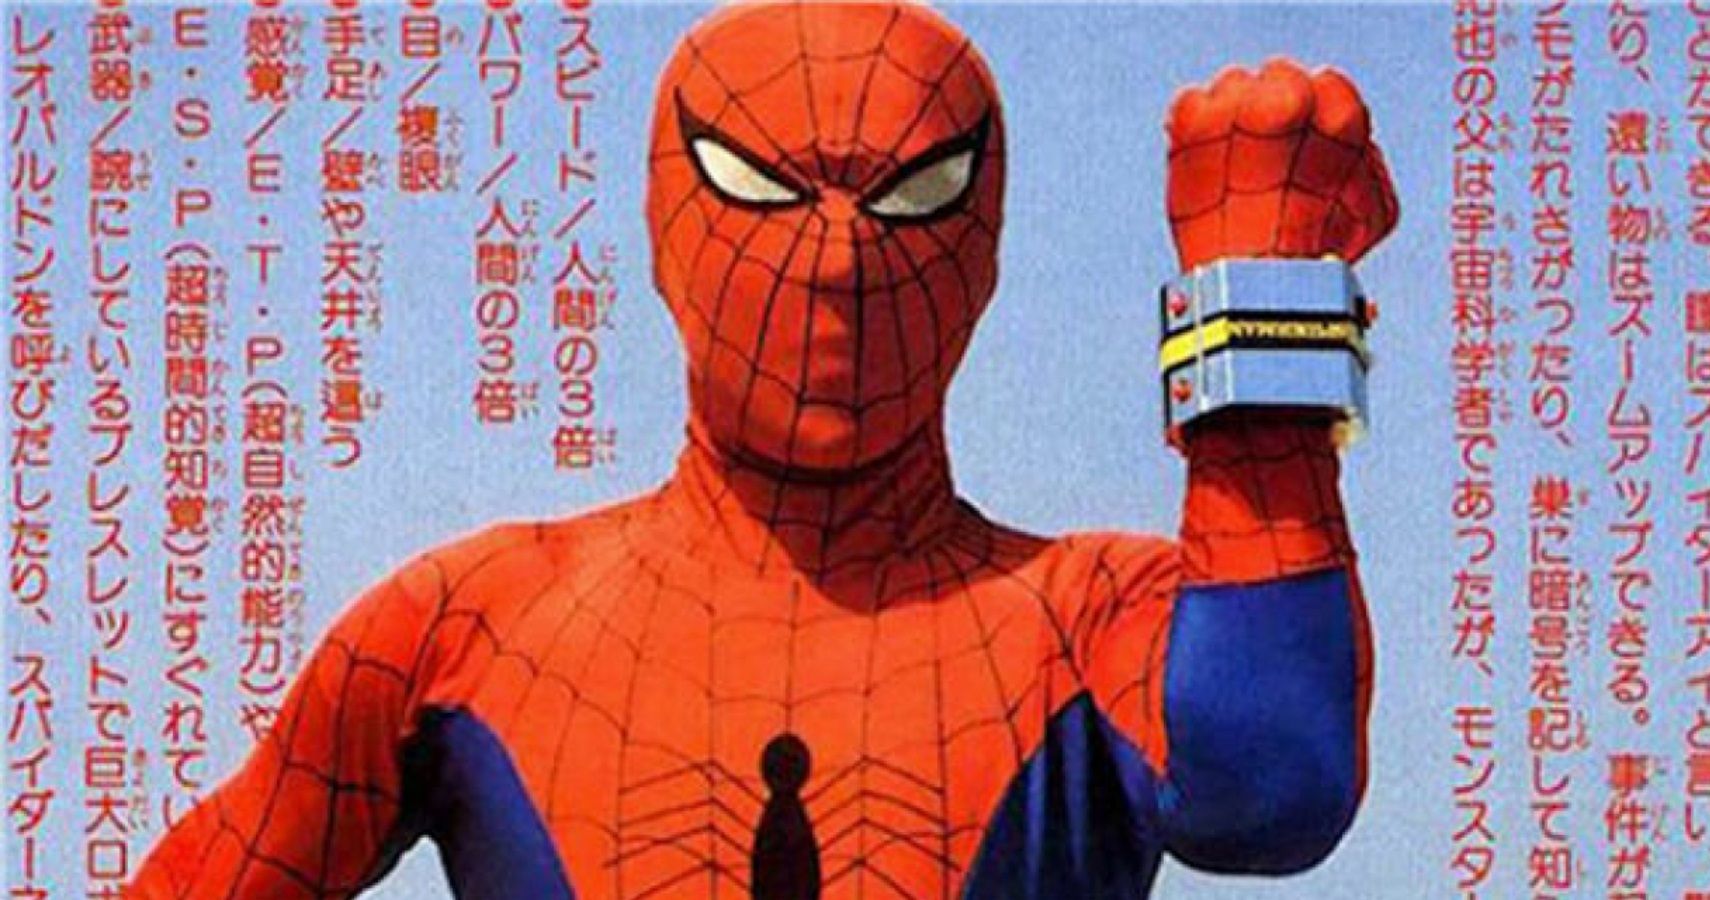 10 Reasons You Need To Give Japanese Spider-Man A Chance